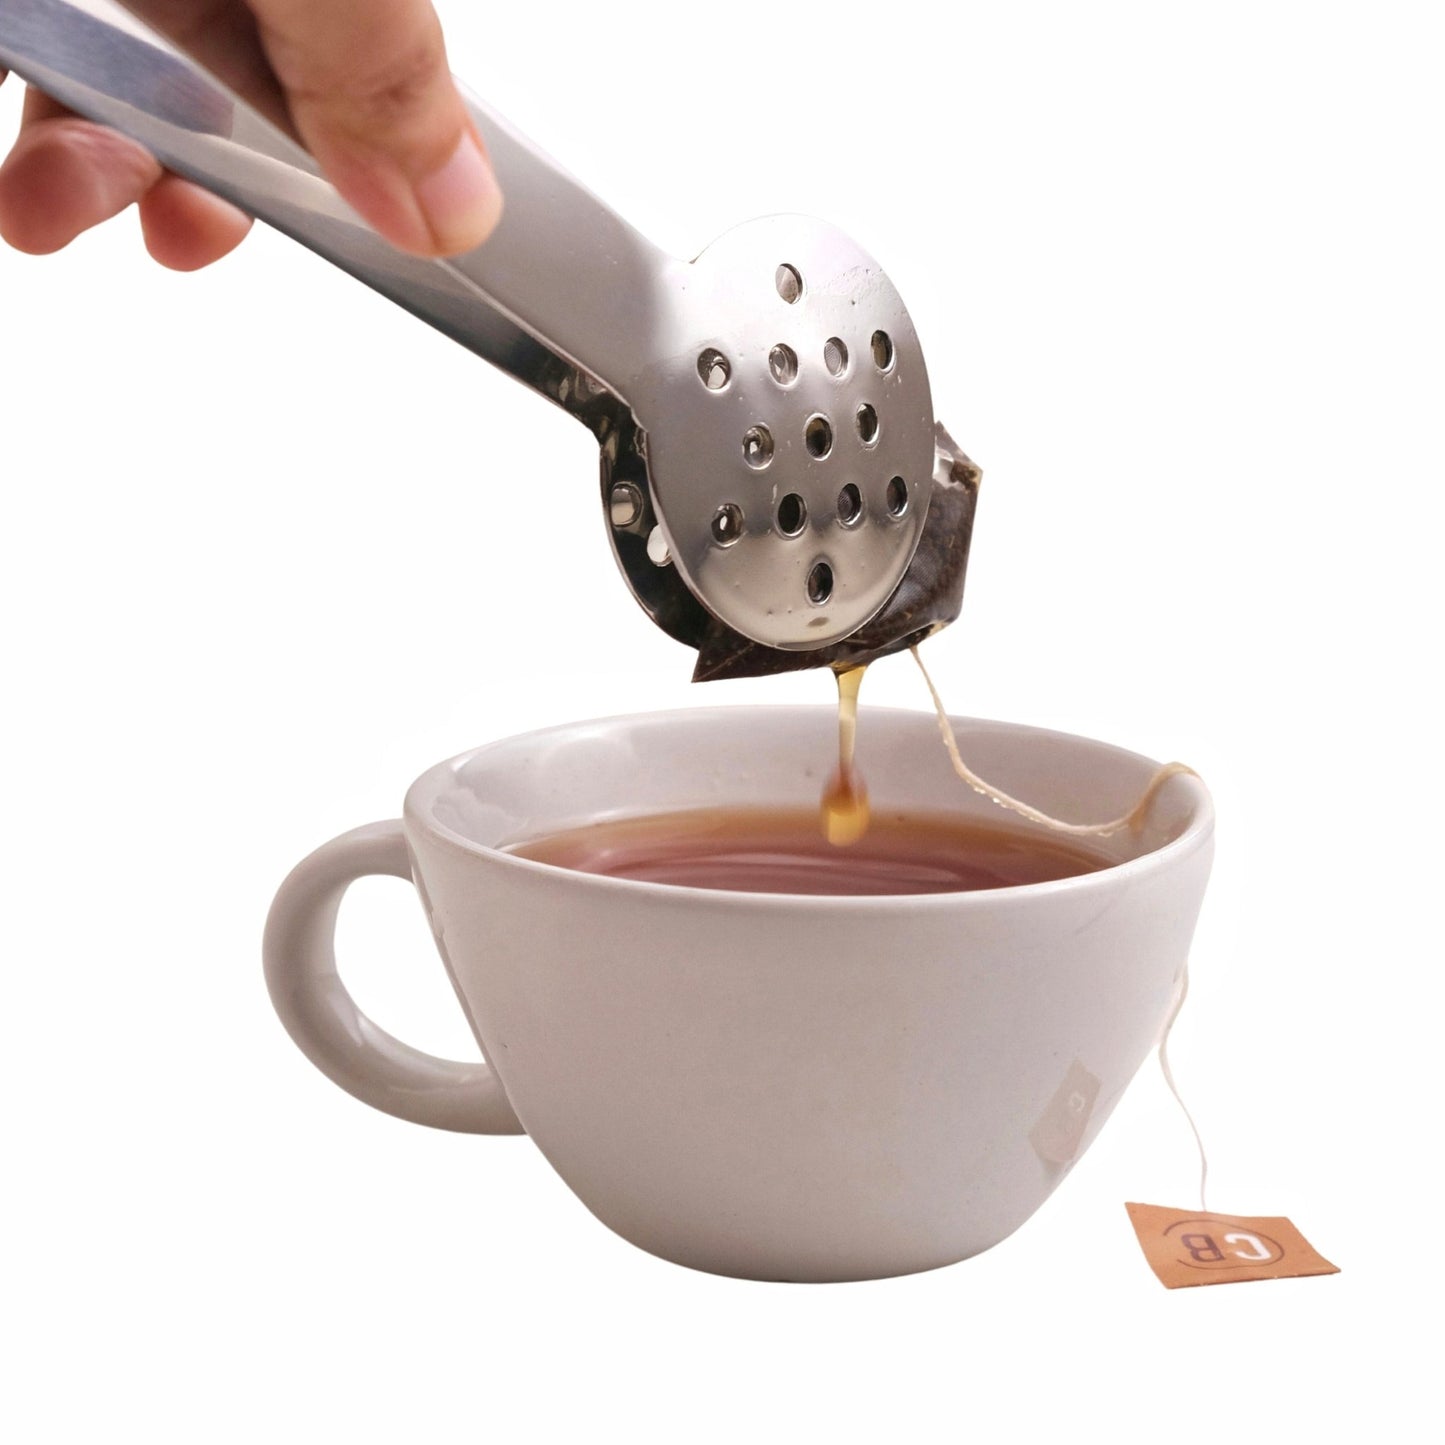 11 Spices Chai Sample & Dirty Chai Sample with Tea Bag Squeezer - ChaiBag